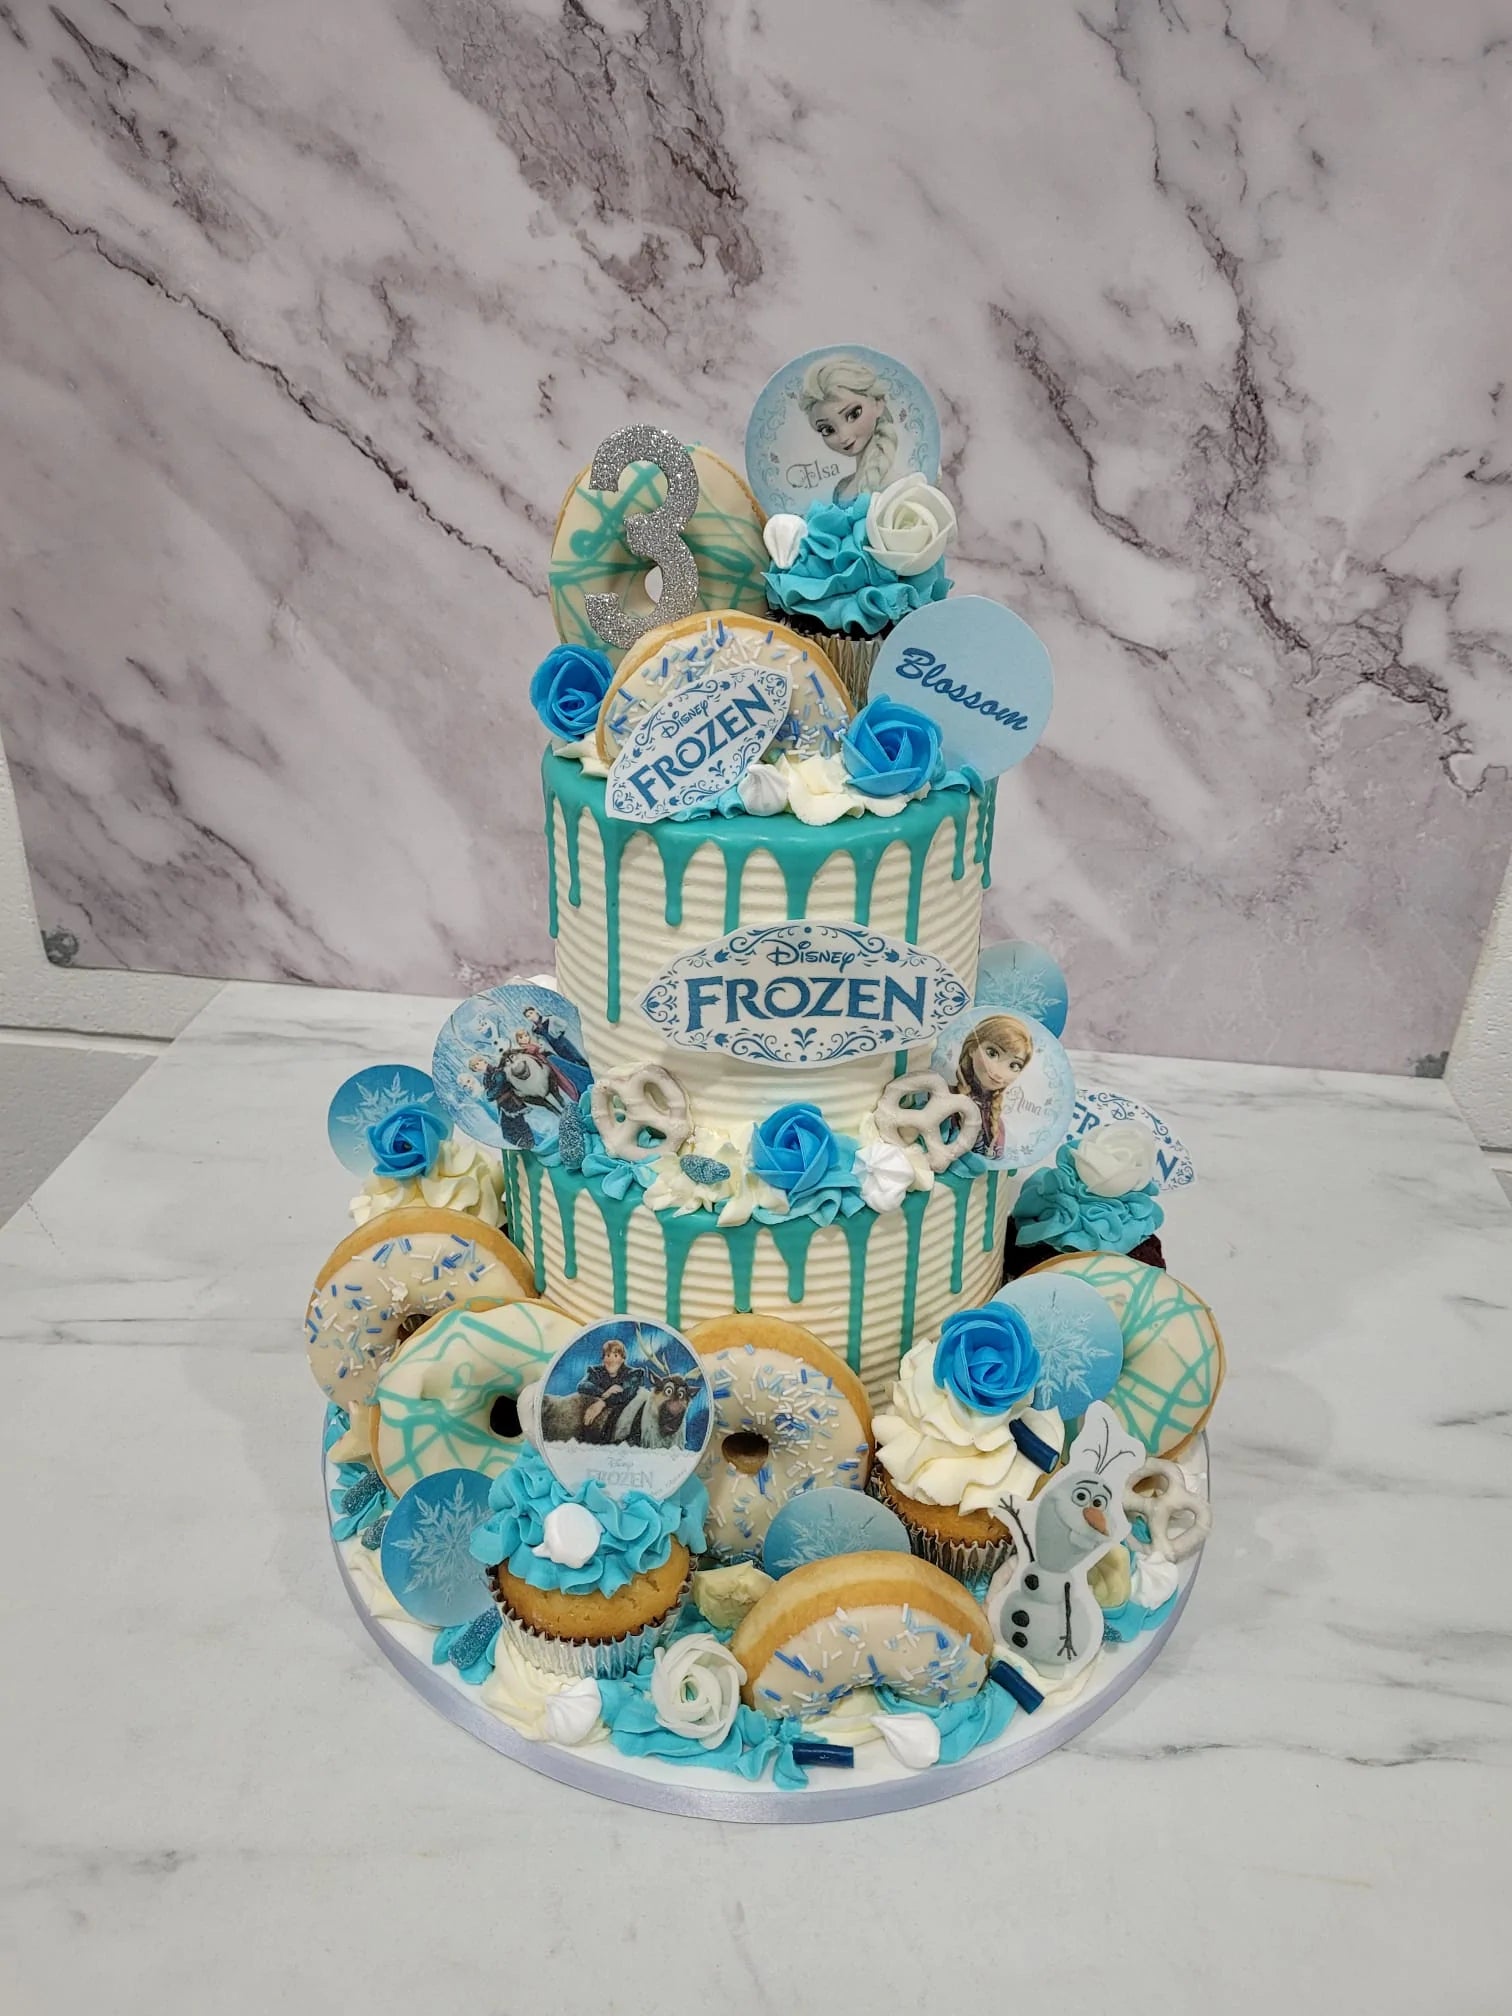 Ombré Drip Cake Inspired by Elsa and Frozen 2 – Popcorner Reviews